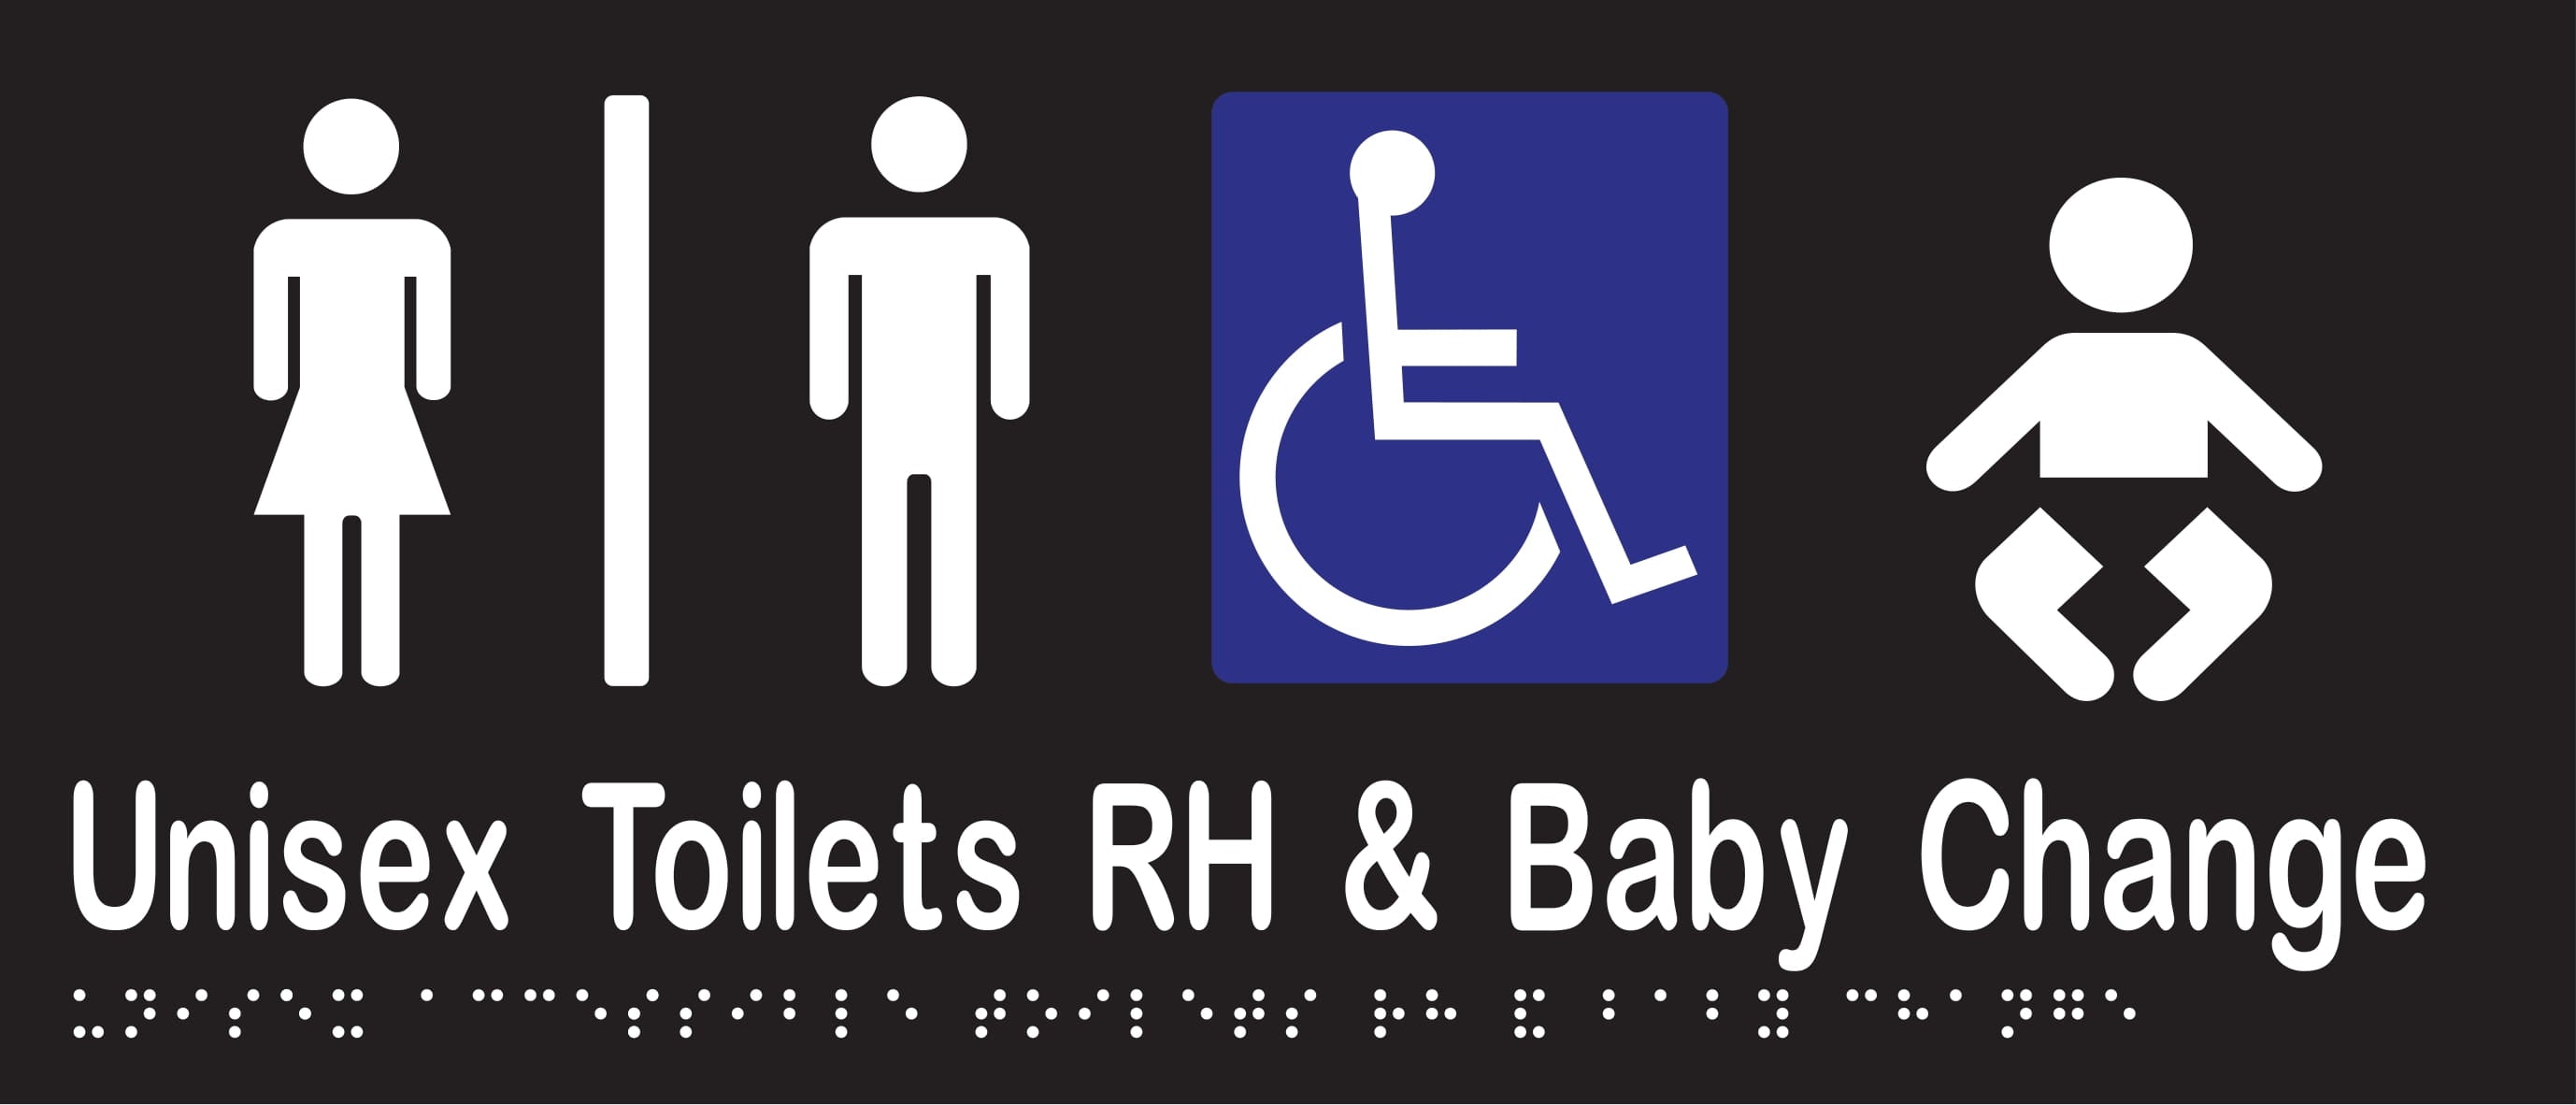 Unisex Accessible Toilets Divided RH & Baby Change Braille 350mmW x 150mmH